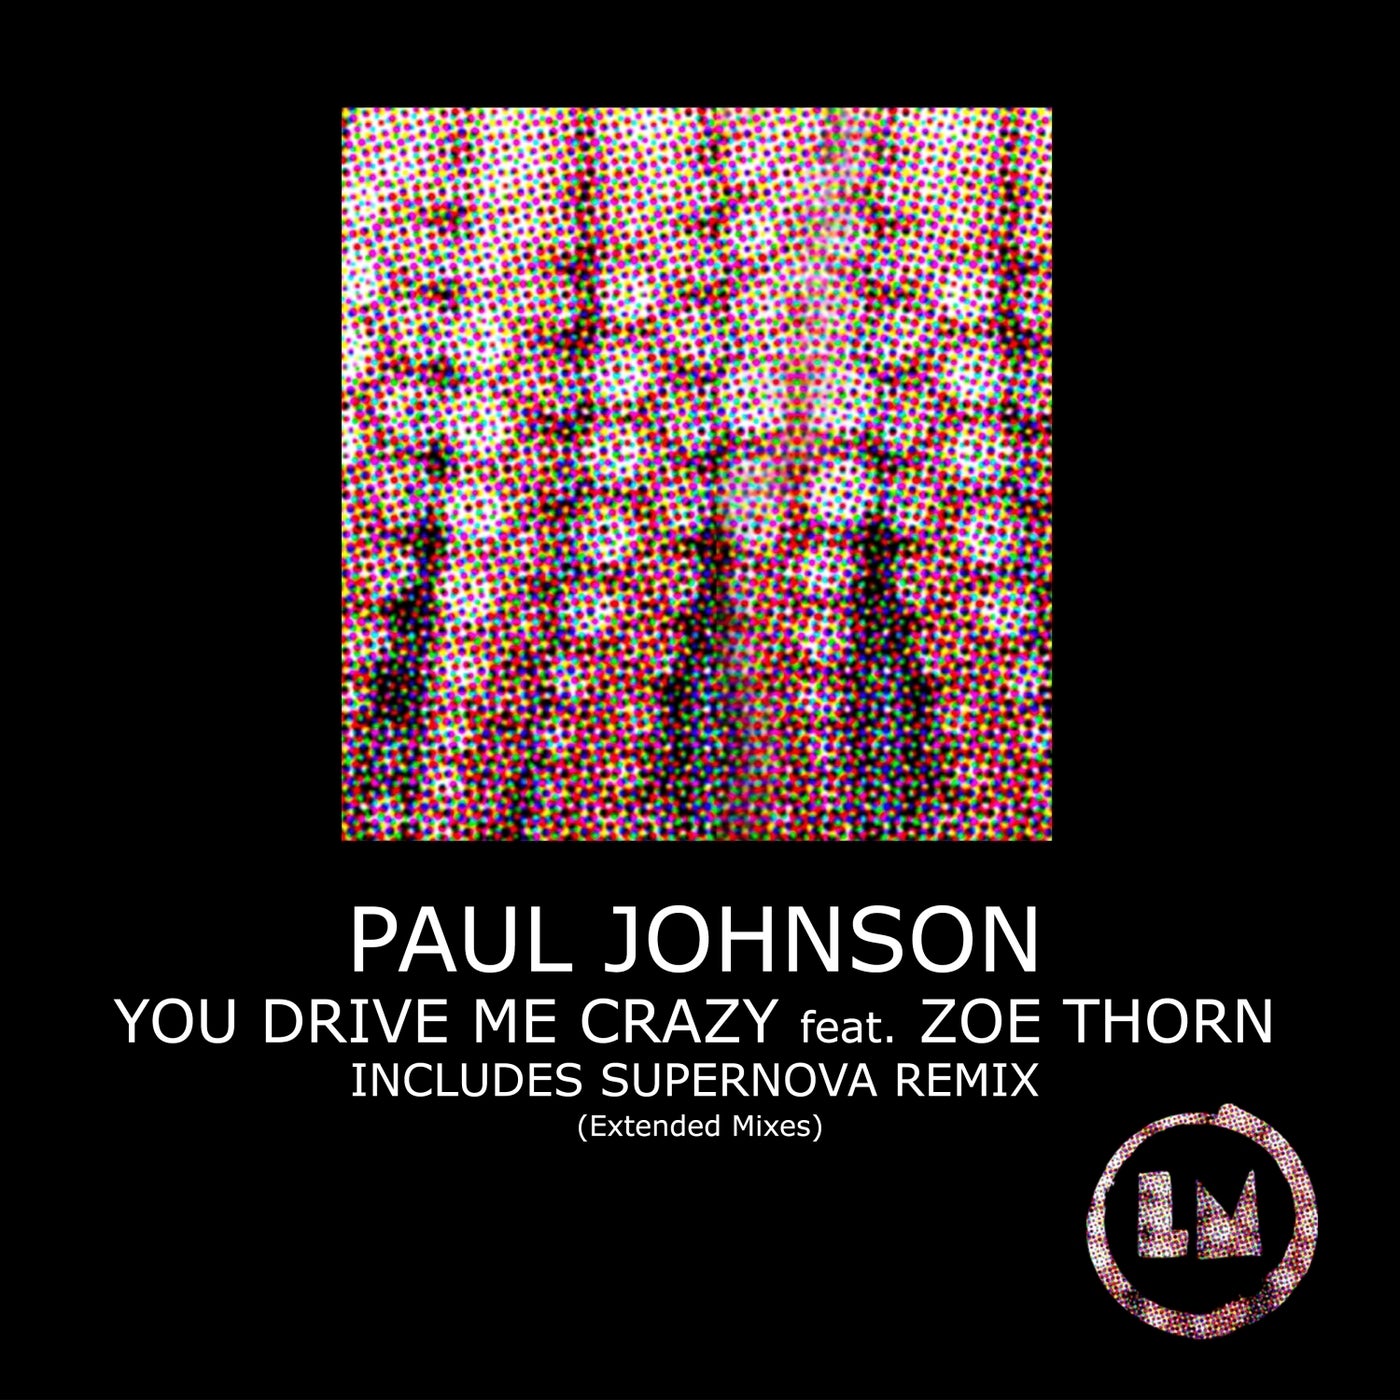 image cover: Paul Johnson, Zoe Thorn - You Drive Me Crazy (Extended Mixes) / LPS298D